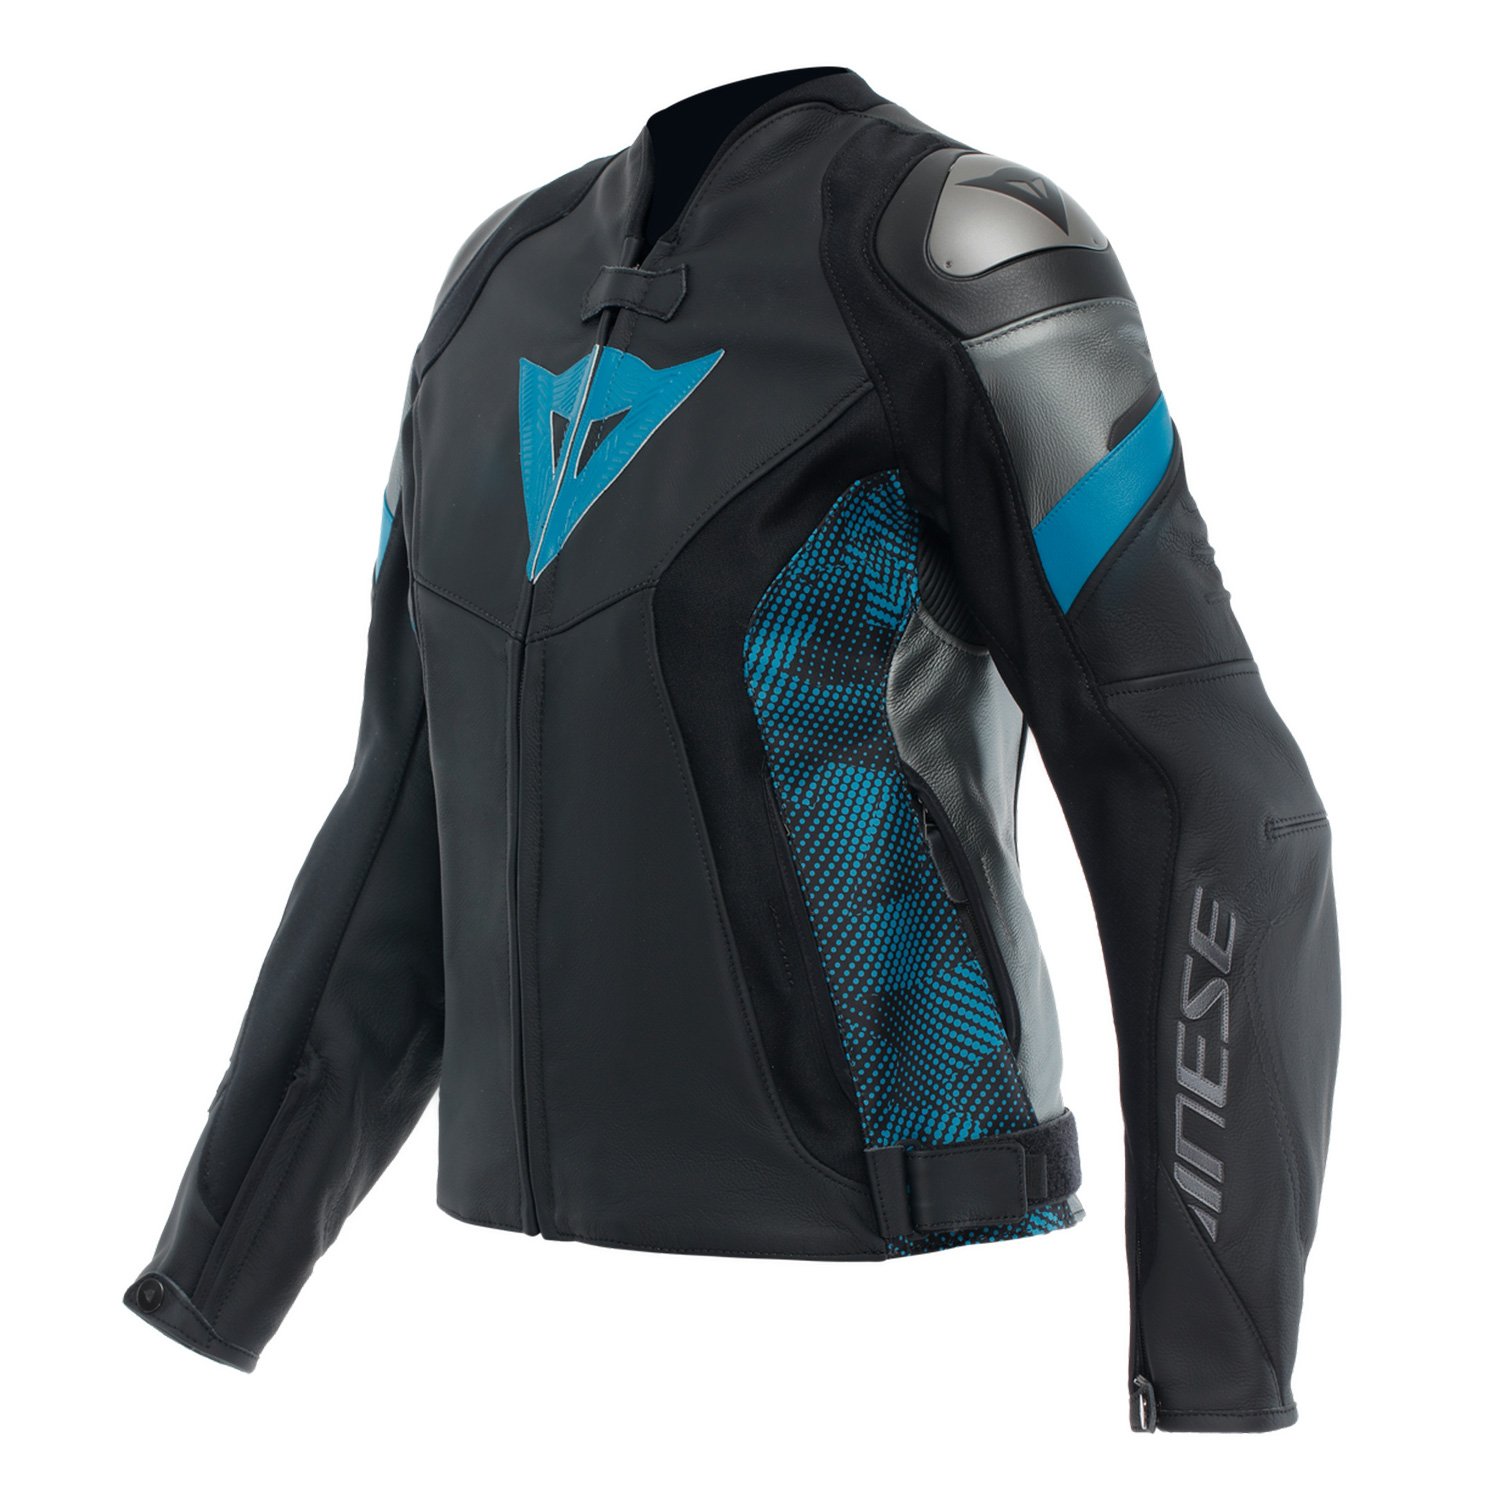 Image of EU Dainese Avro 5 Leather Jacket WMN Black Teal Anthracite Taille 42